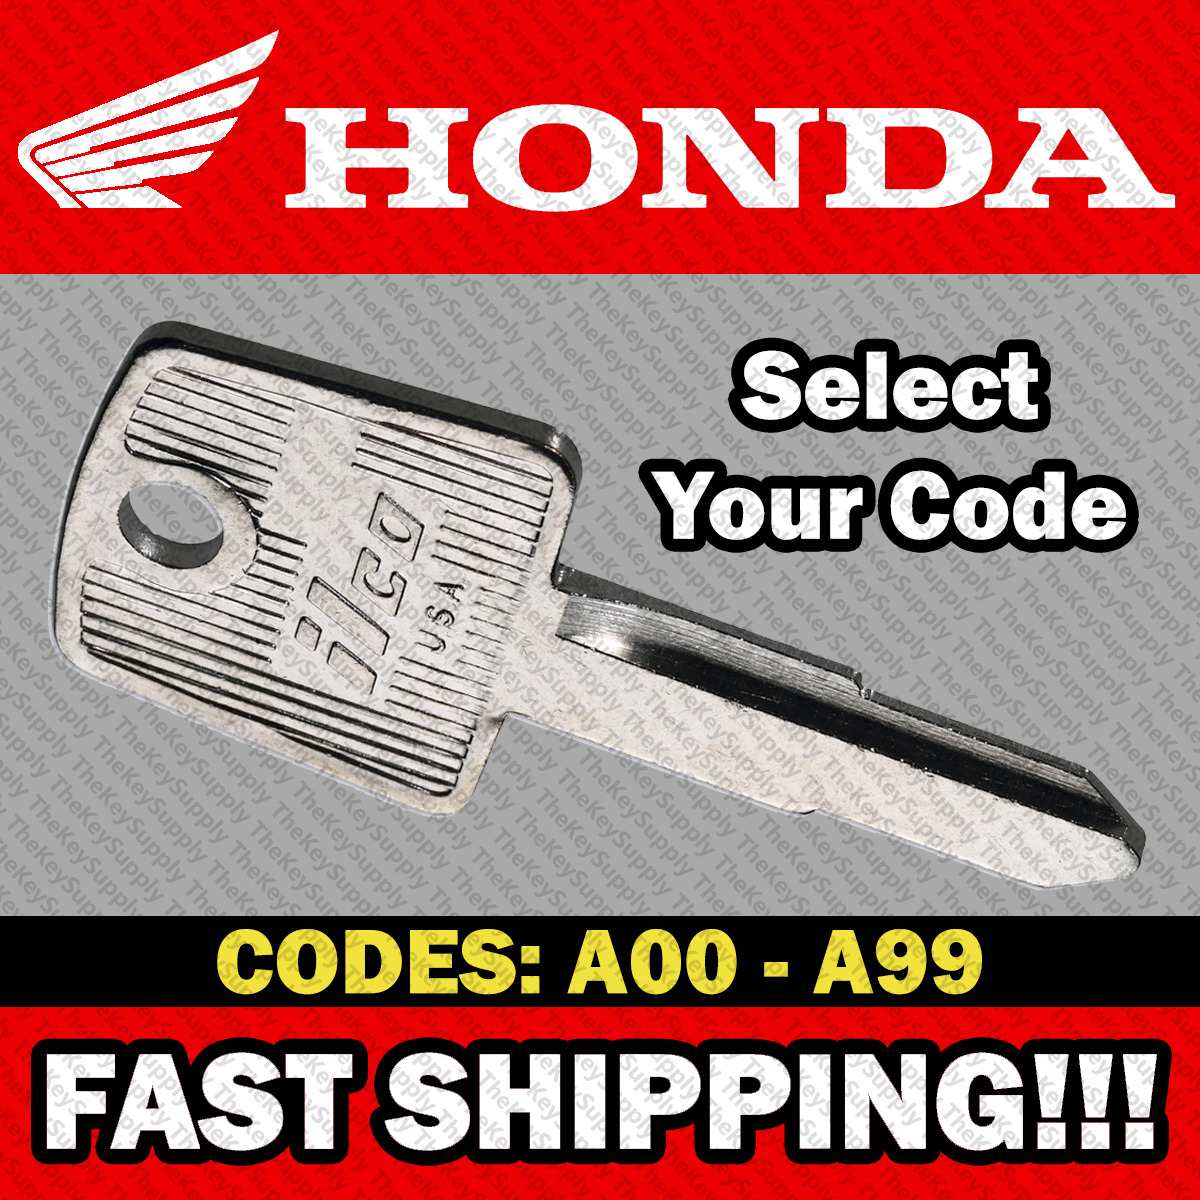 Honda Motorcycle Replacement Key Cut to Code A00 - A99